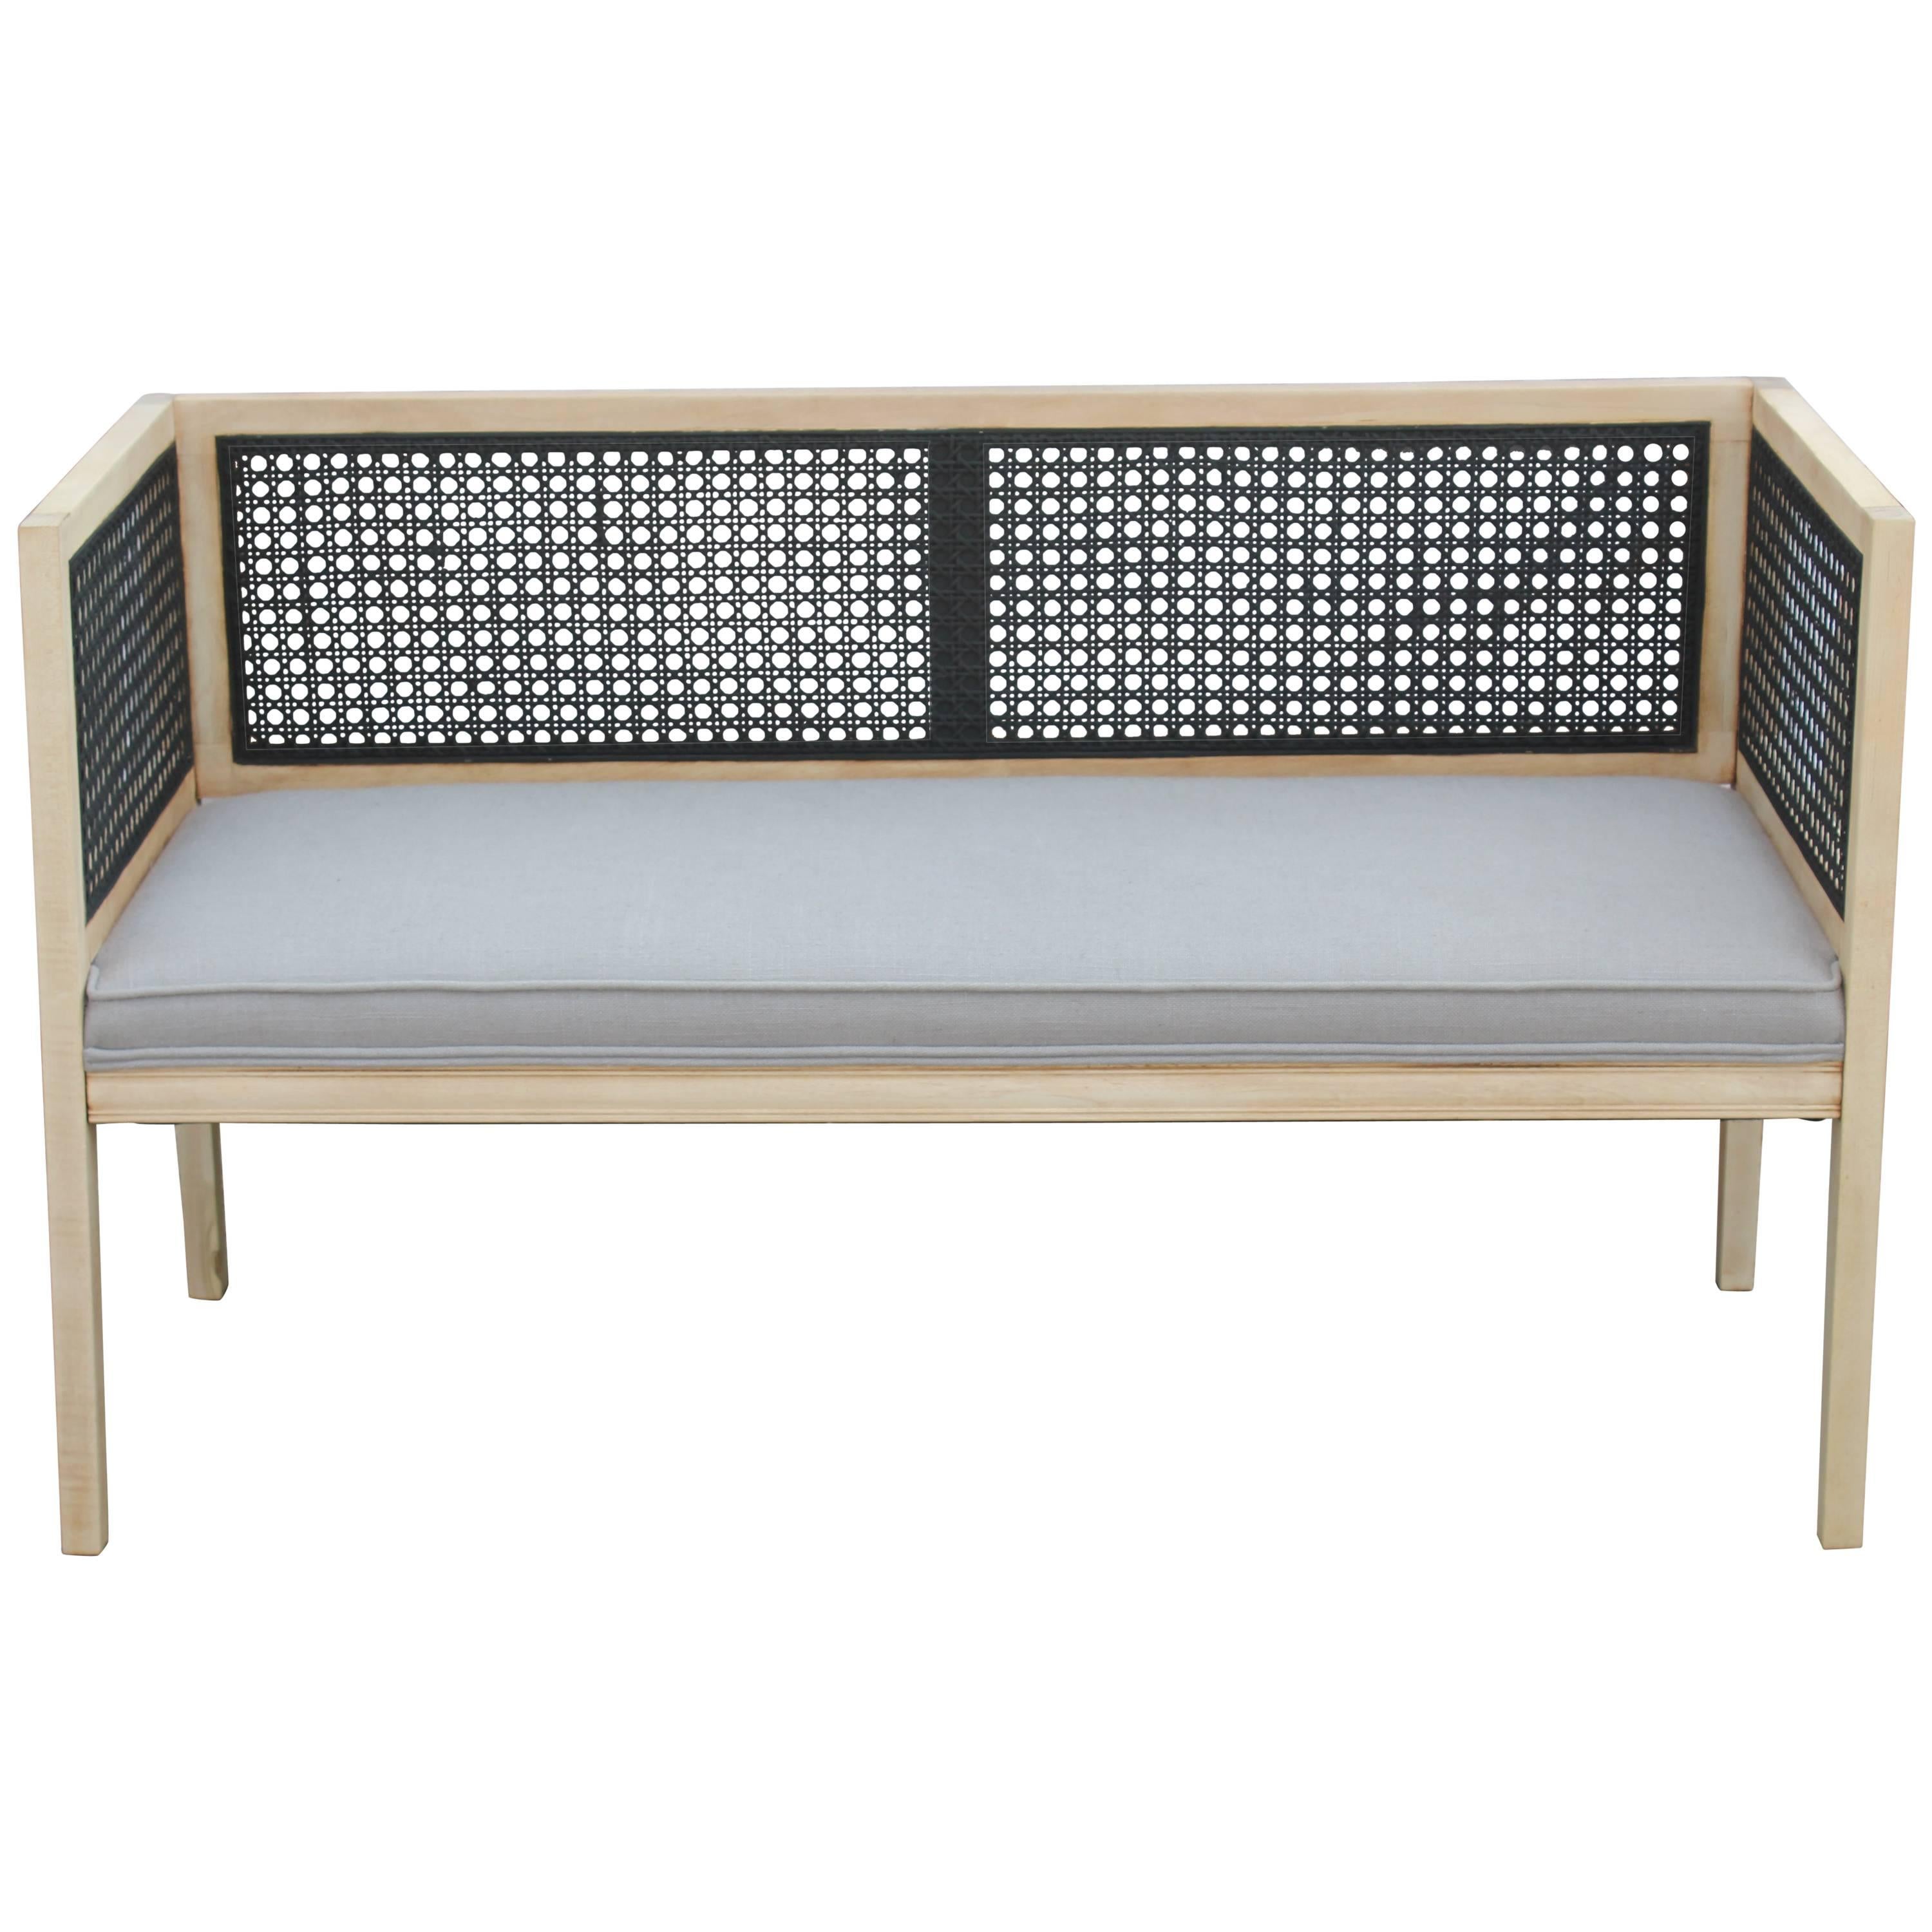 Modern Cane and Bleached Wood Settee or Love Seat in a Light Grey Woven